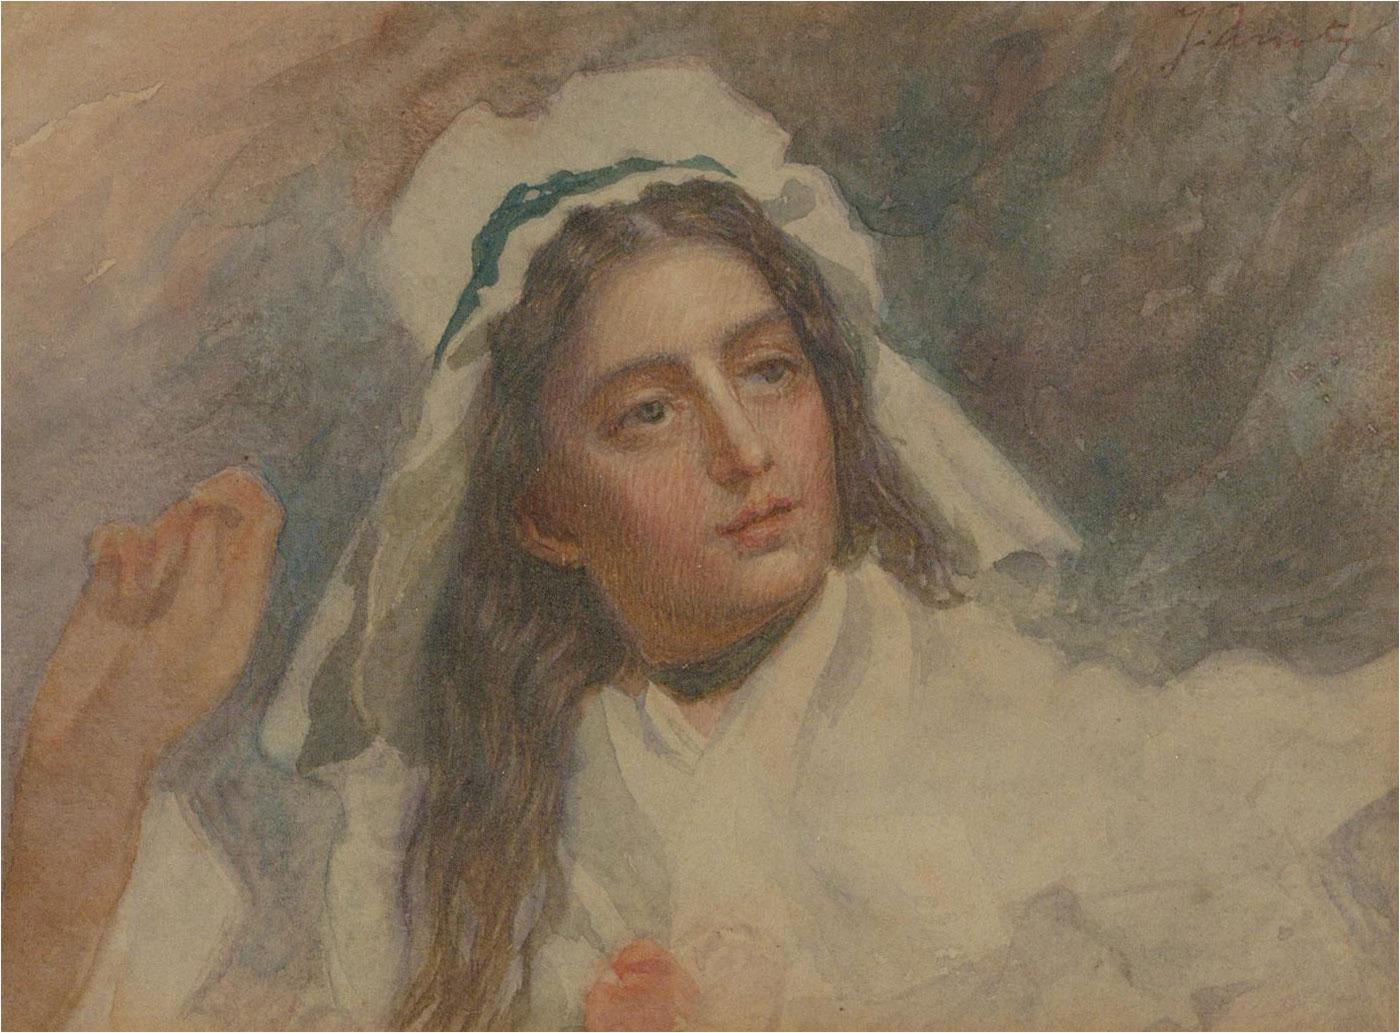 A beautiful watercolour portrait in the traditional Victorian watercolour style with delicate hatching in the face. The pretty young woman has dark, flowing hair with a white bonnet black choker and white linen dress. She is holding her hands aloft